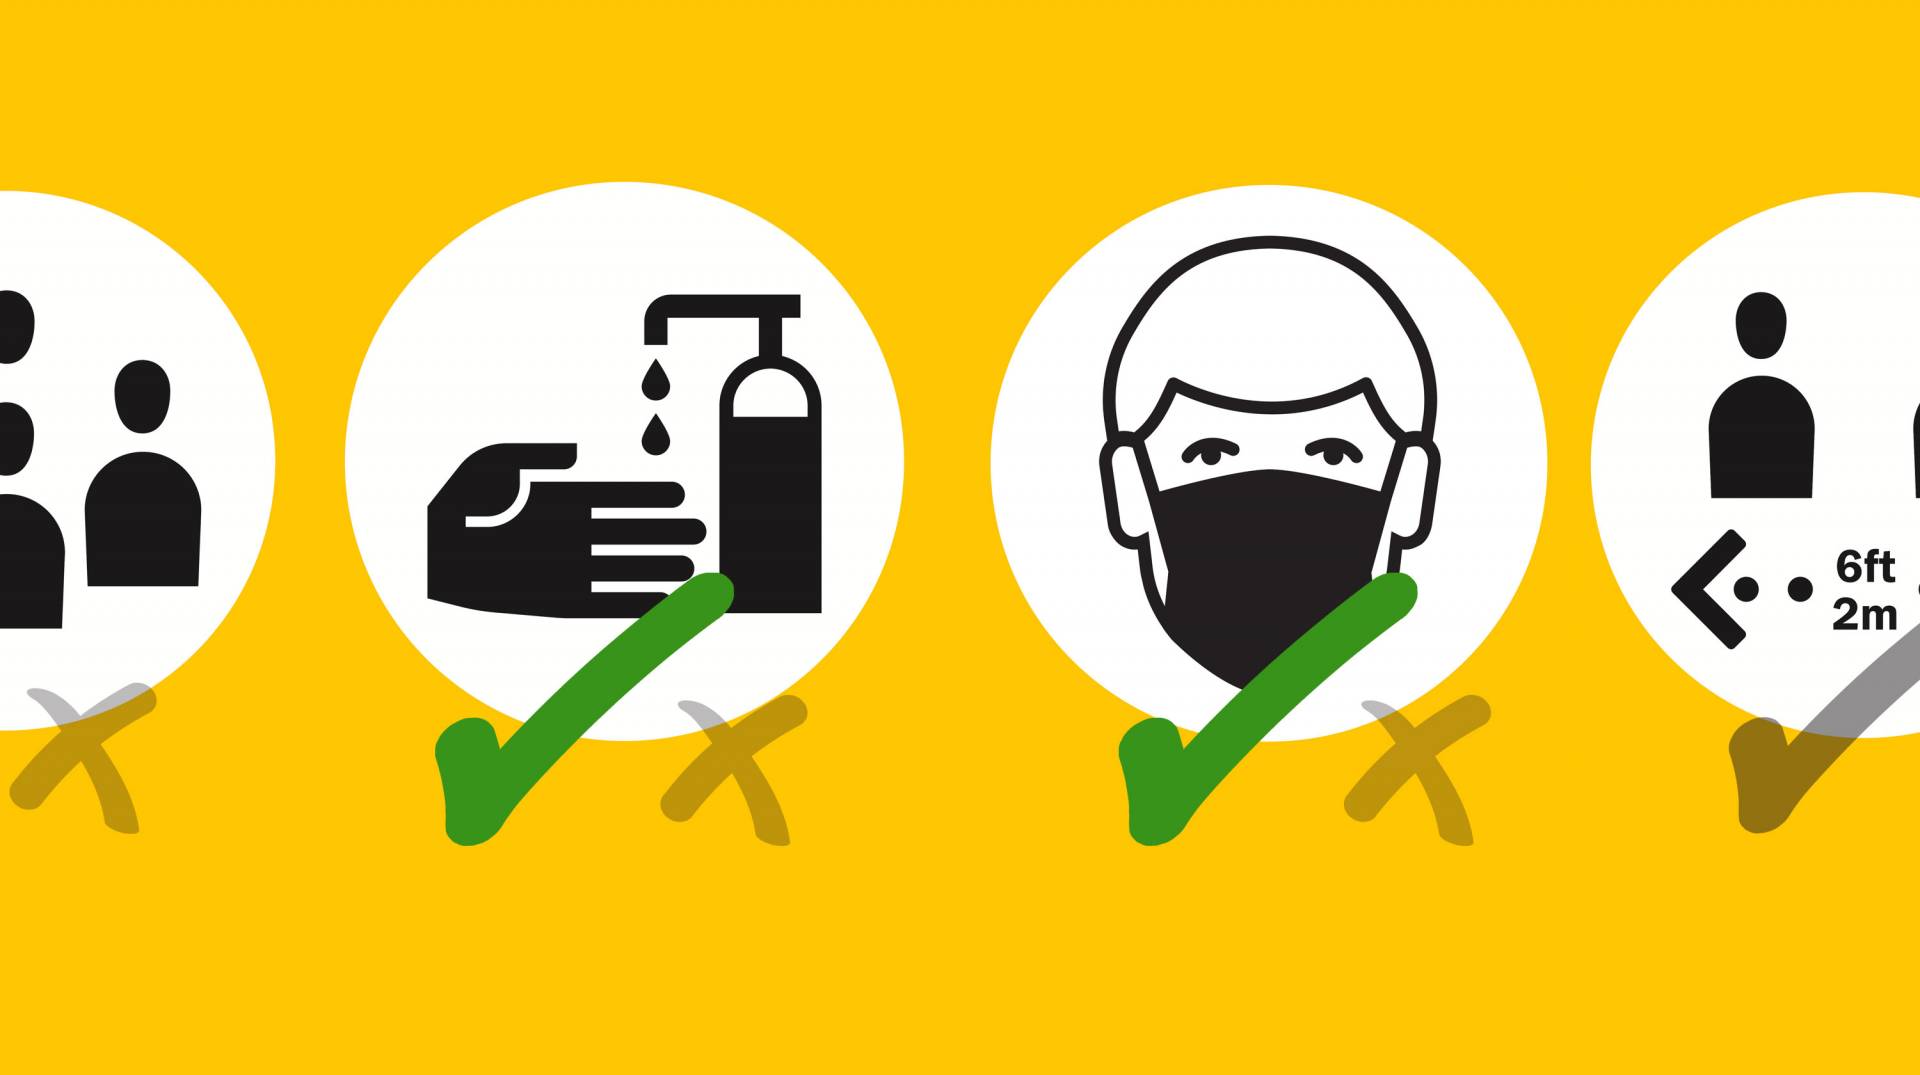 icons for room capacity, hand sanitizer use, mask-wearing, social distancing with check marks and xs